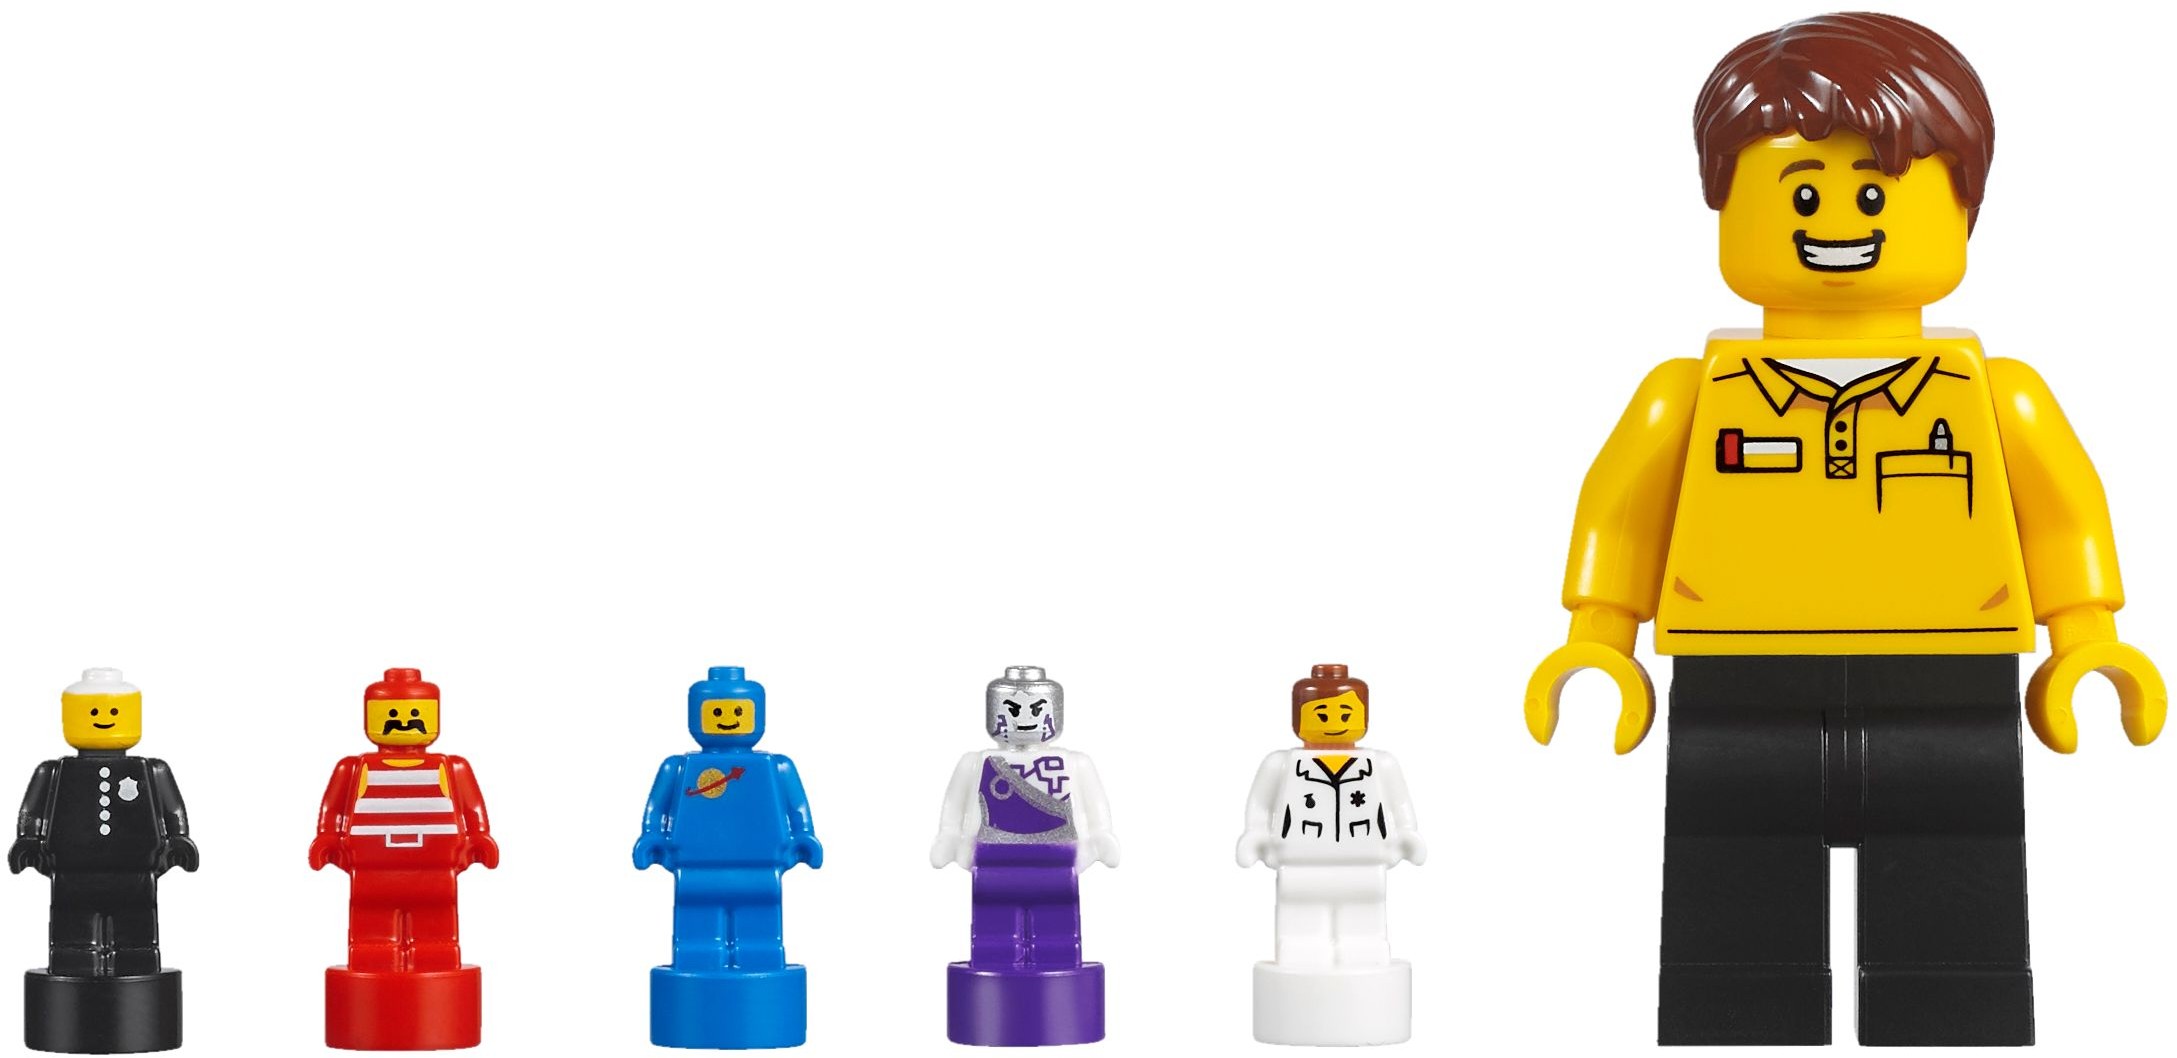 lego online minifigure factory download free